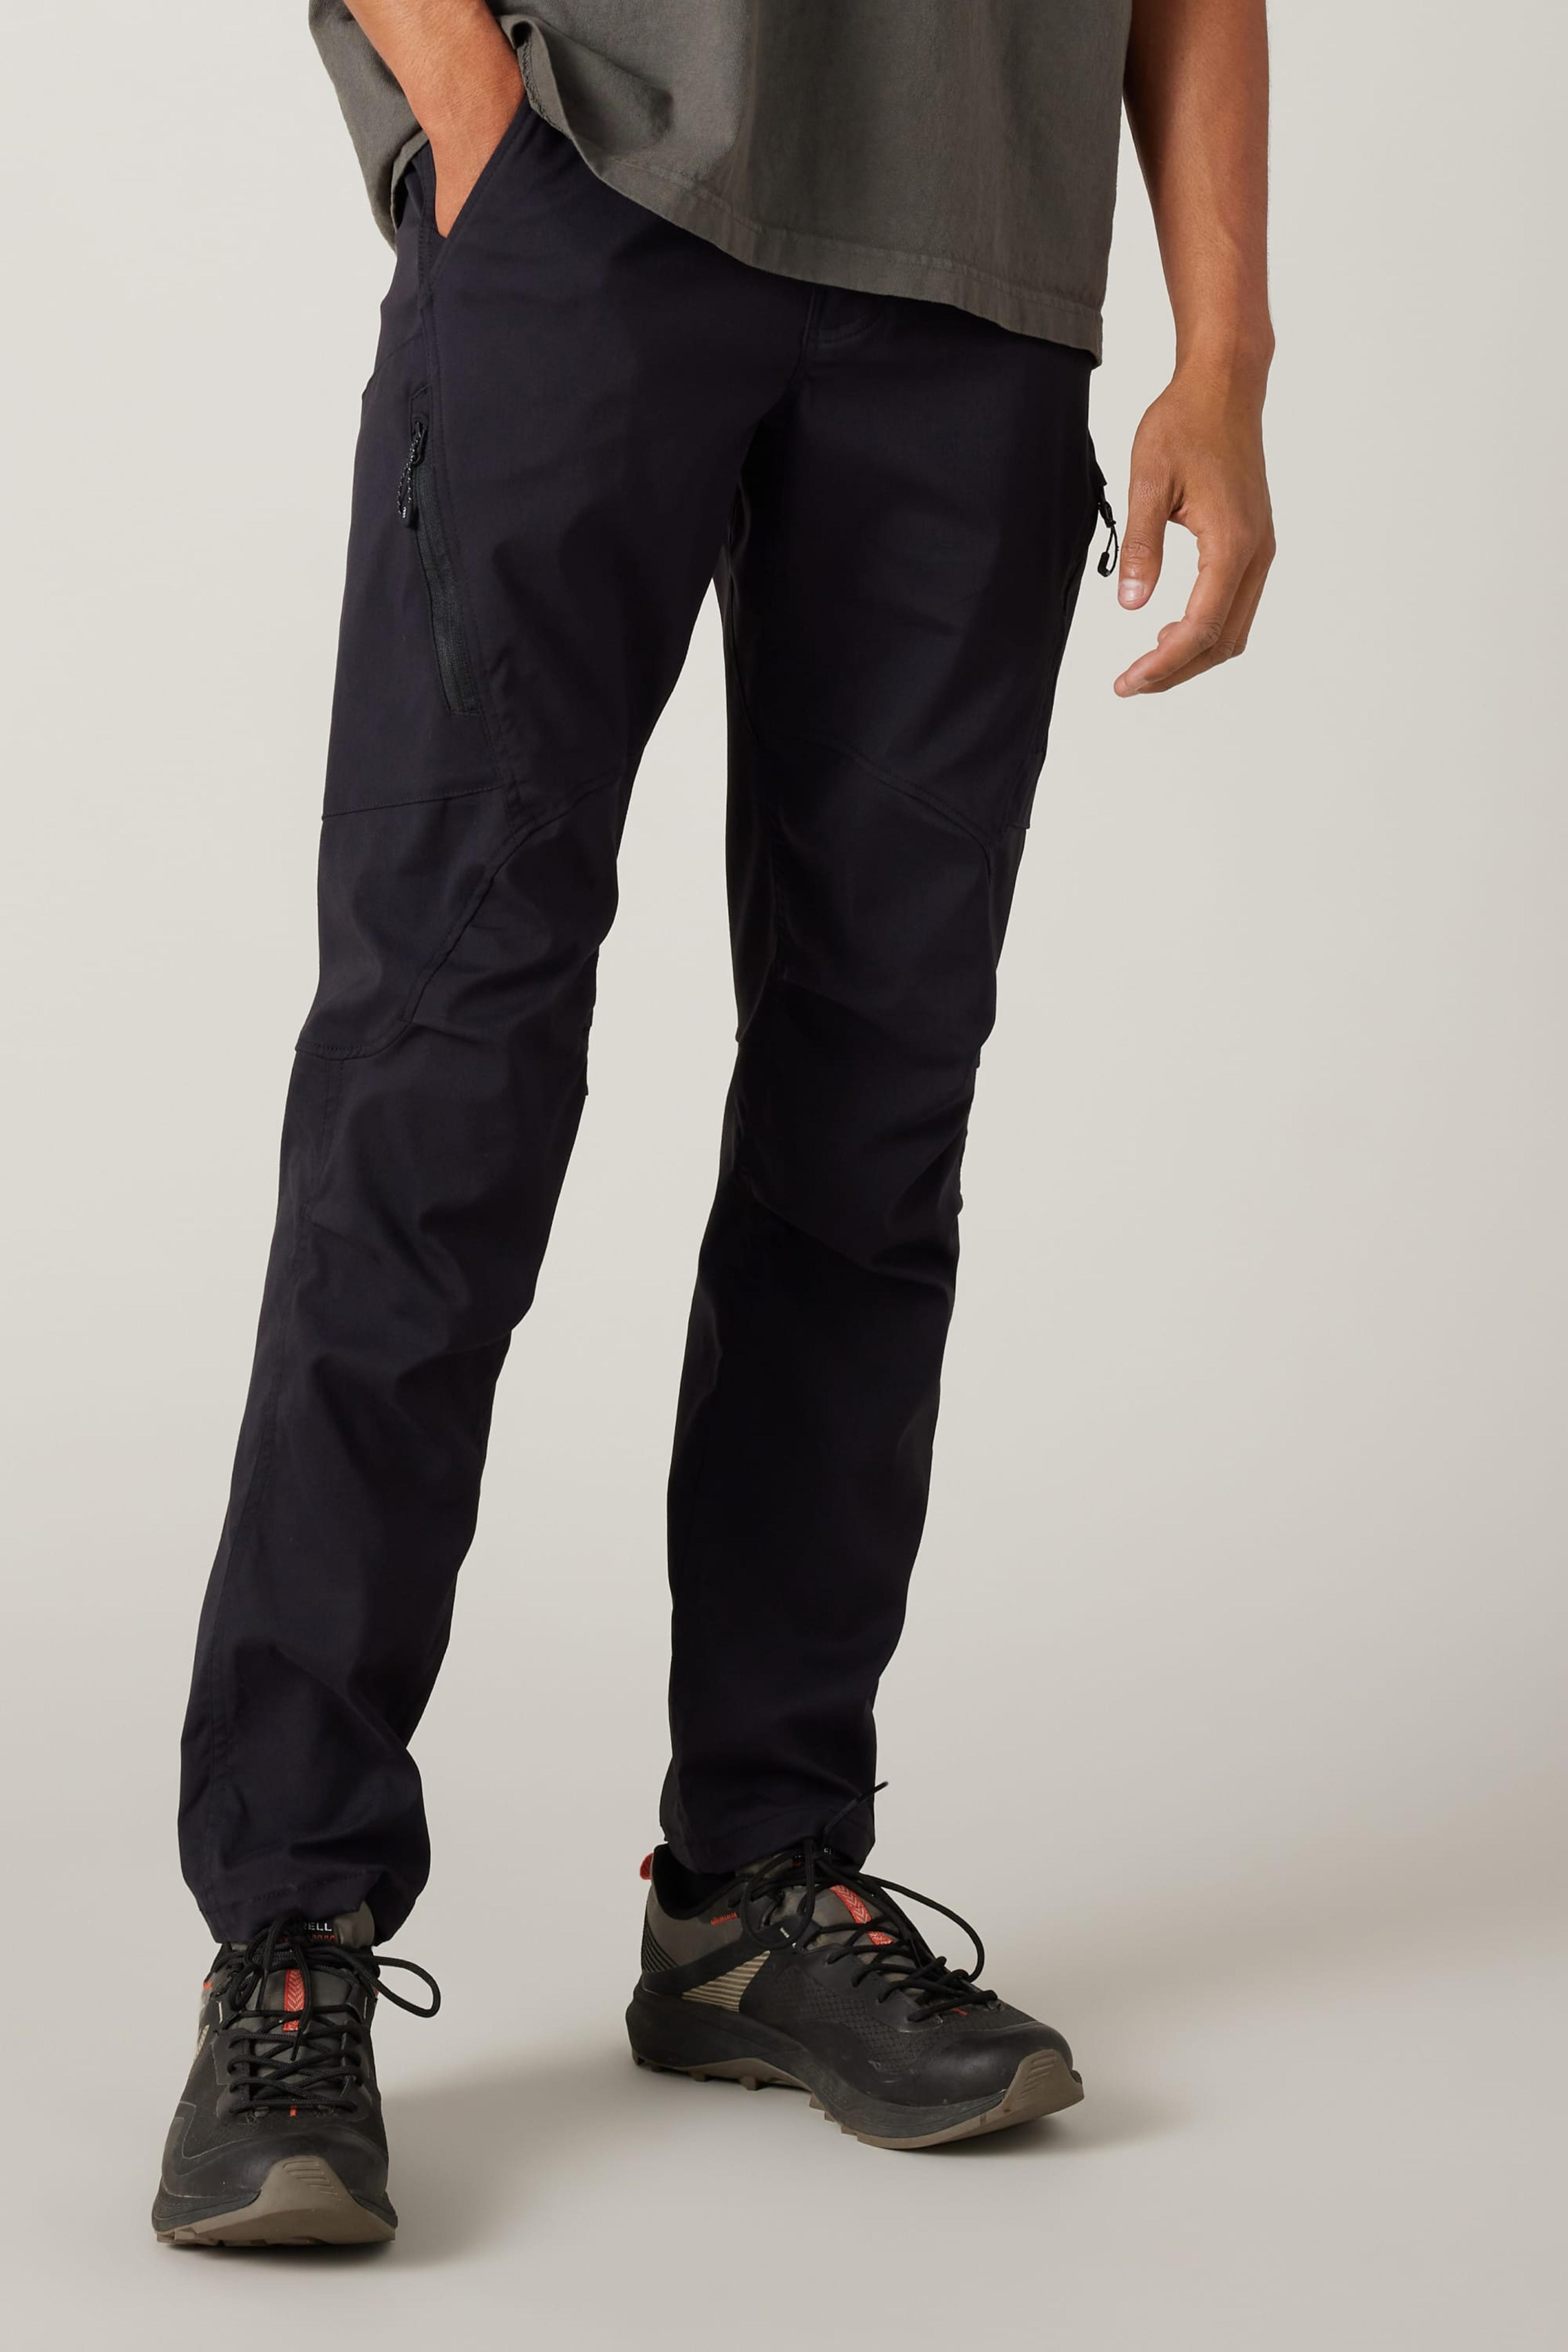 Alternate View 40 of 686 Men's Anything Cargo Pant - Slim Fit